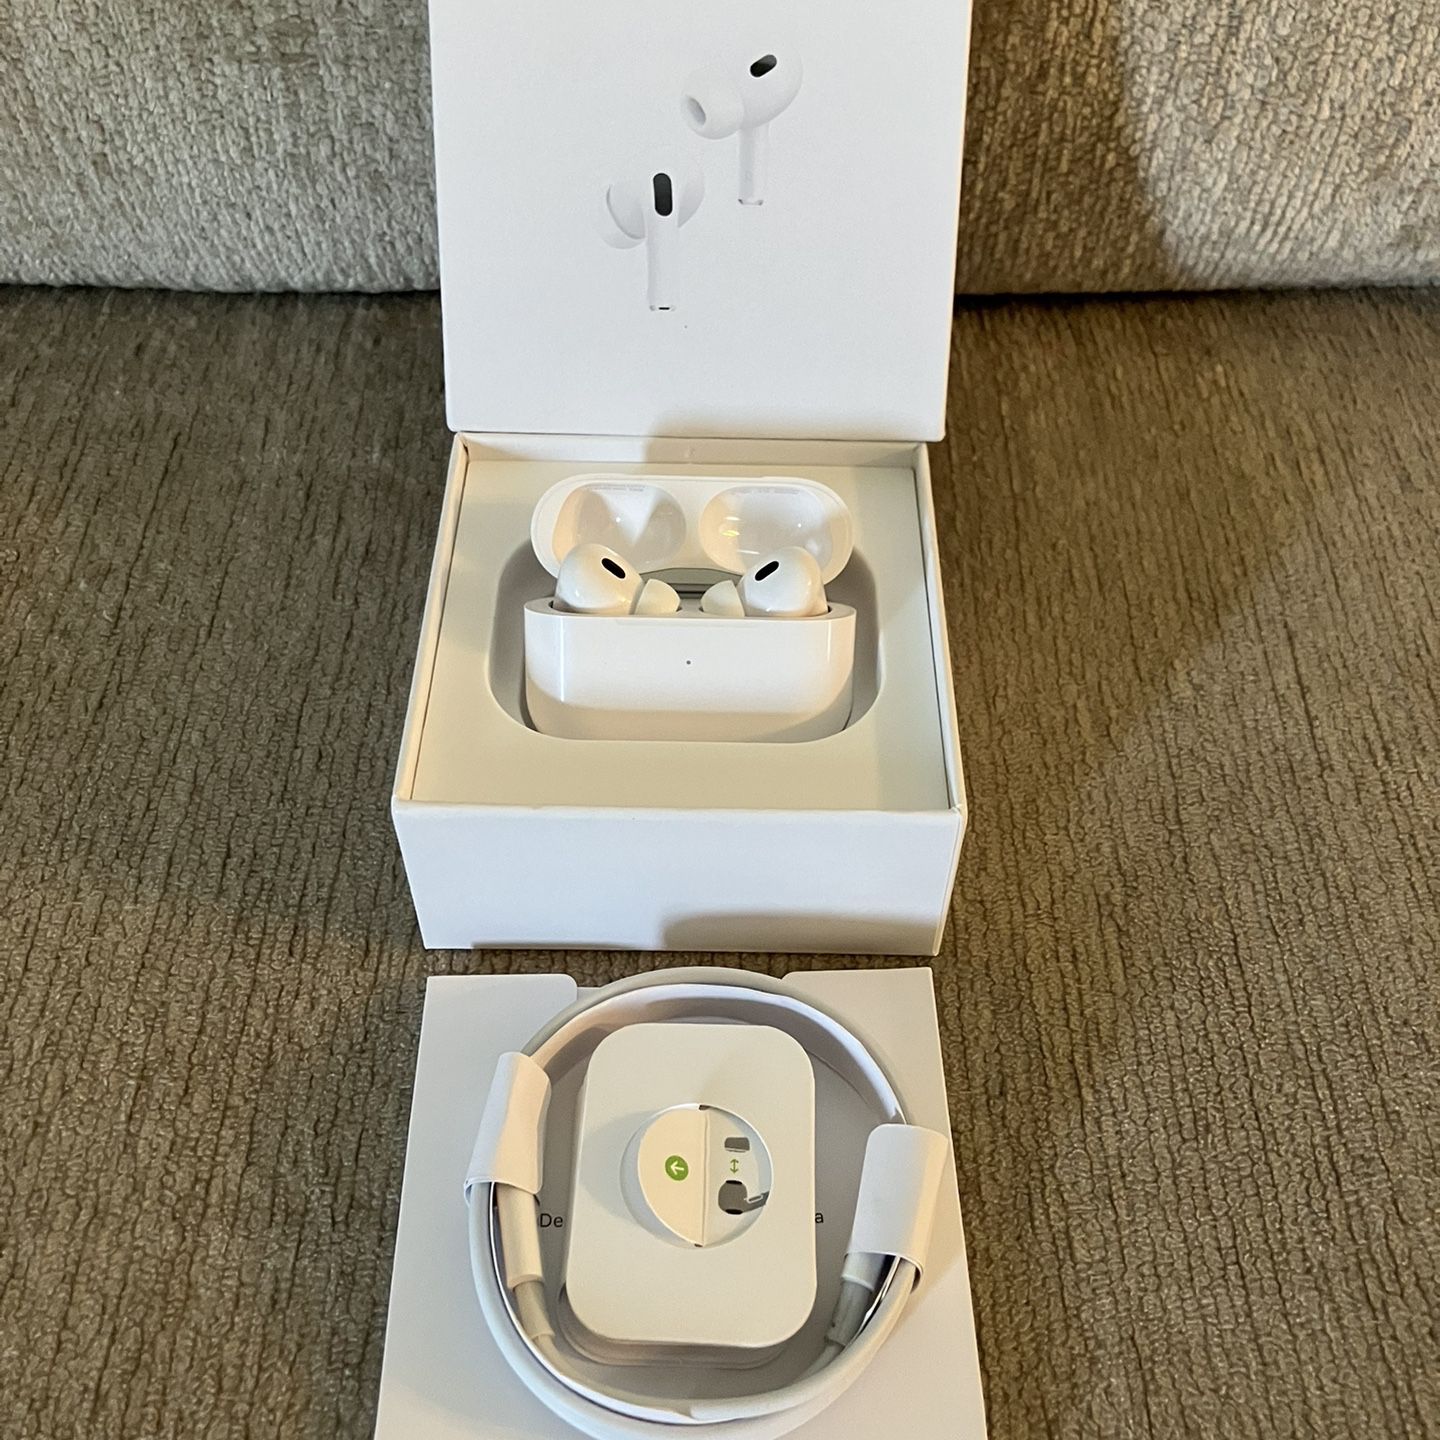 (BEST OFFER) AirPods Pro 2nd Generation 